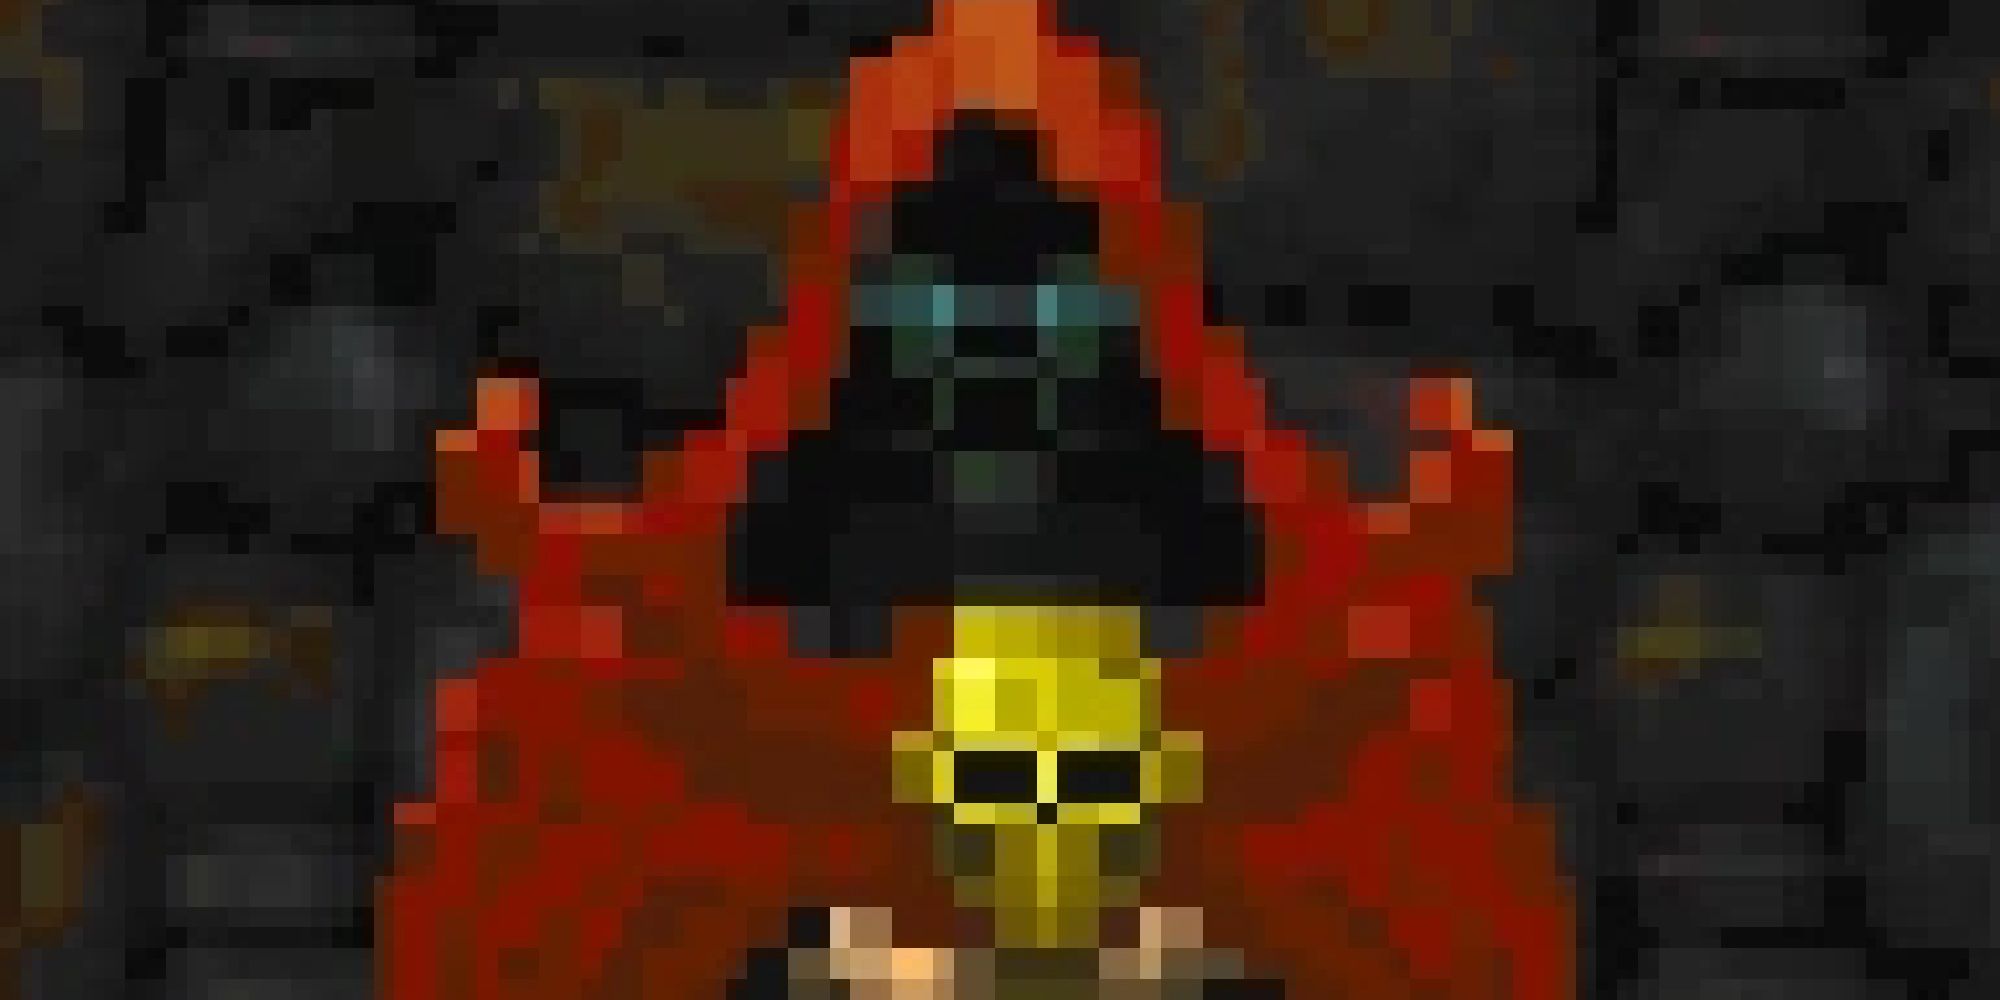 Mannimarco in a red robe with a skull staff standing in a stone brick dungeon